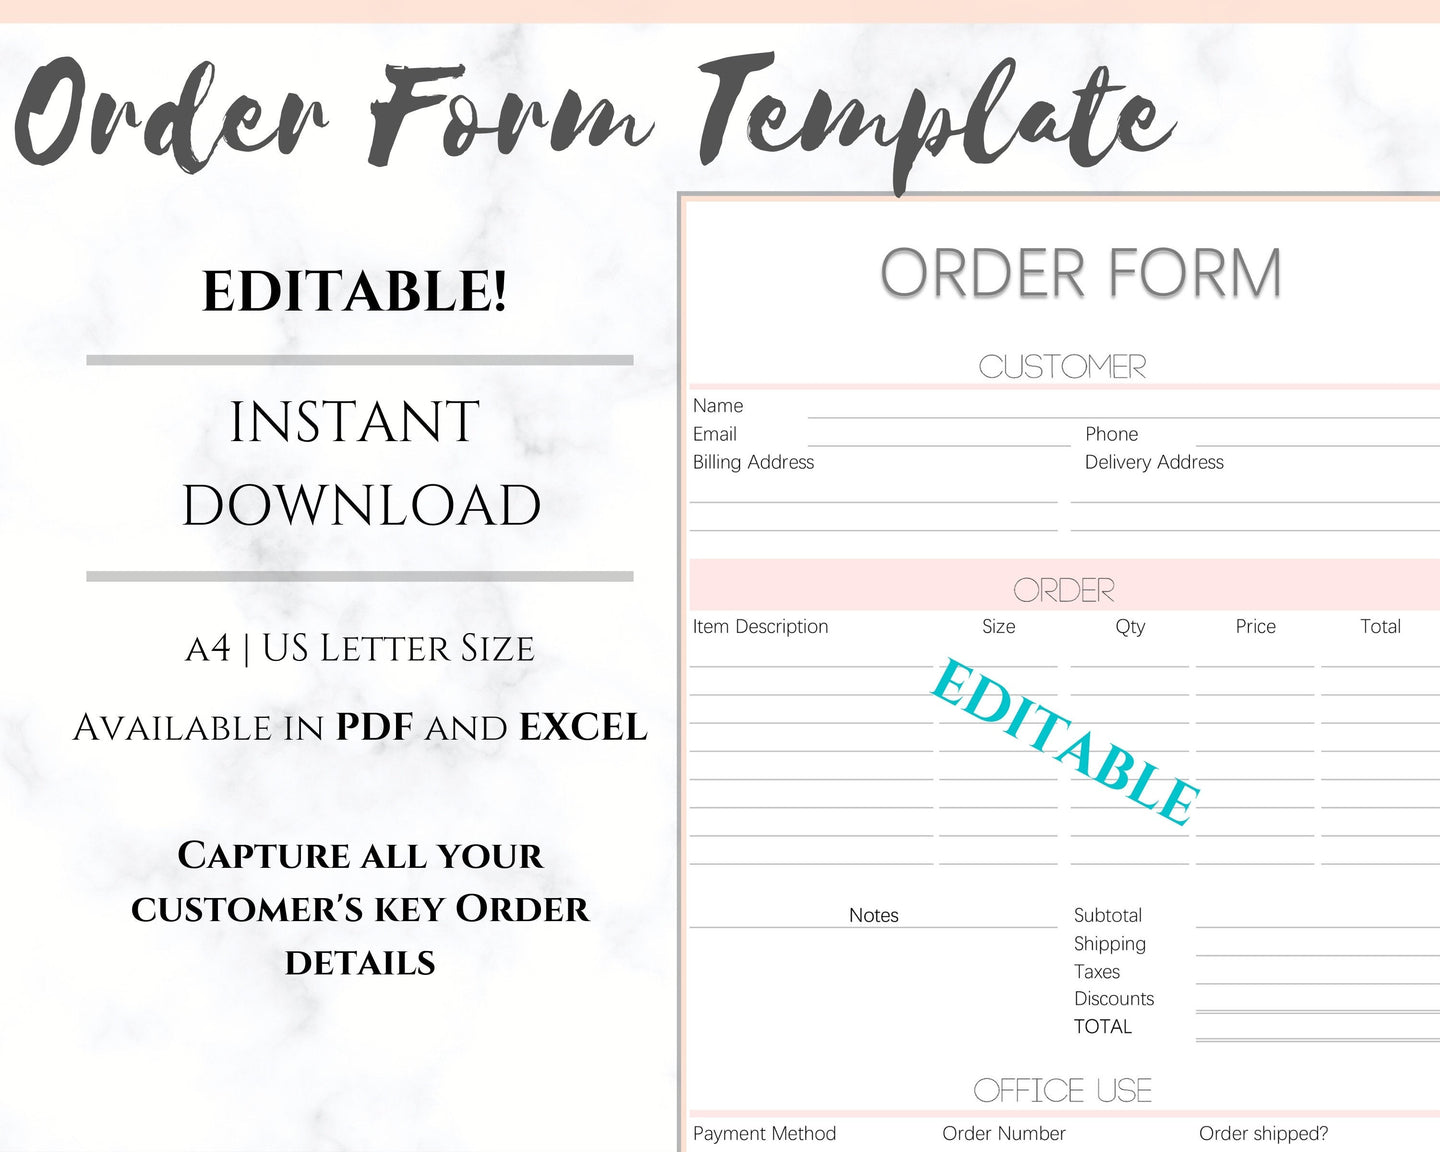 ORDER FORM Invoice Template, EDITABLE Custom Receipt Template, Printable Customer Sales Order Invoice, Receipt Form, Edit & Download | Style 9